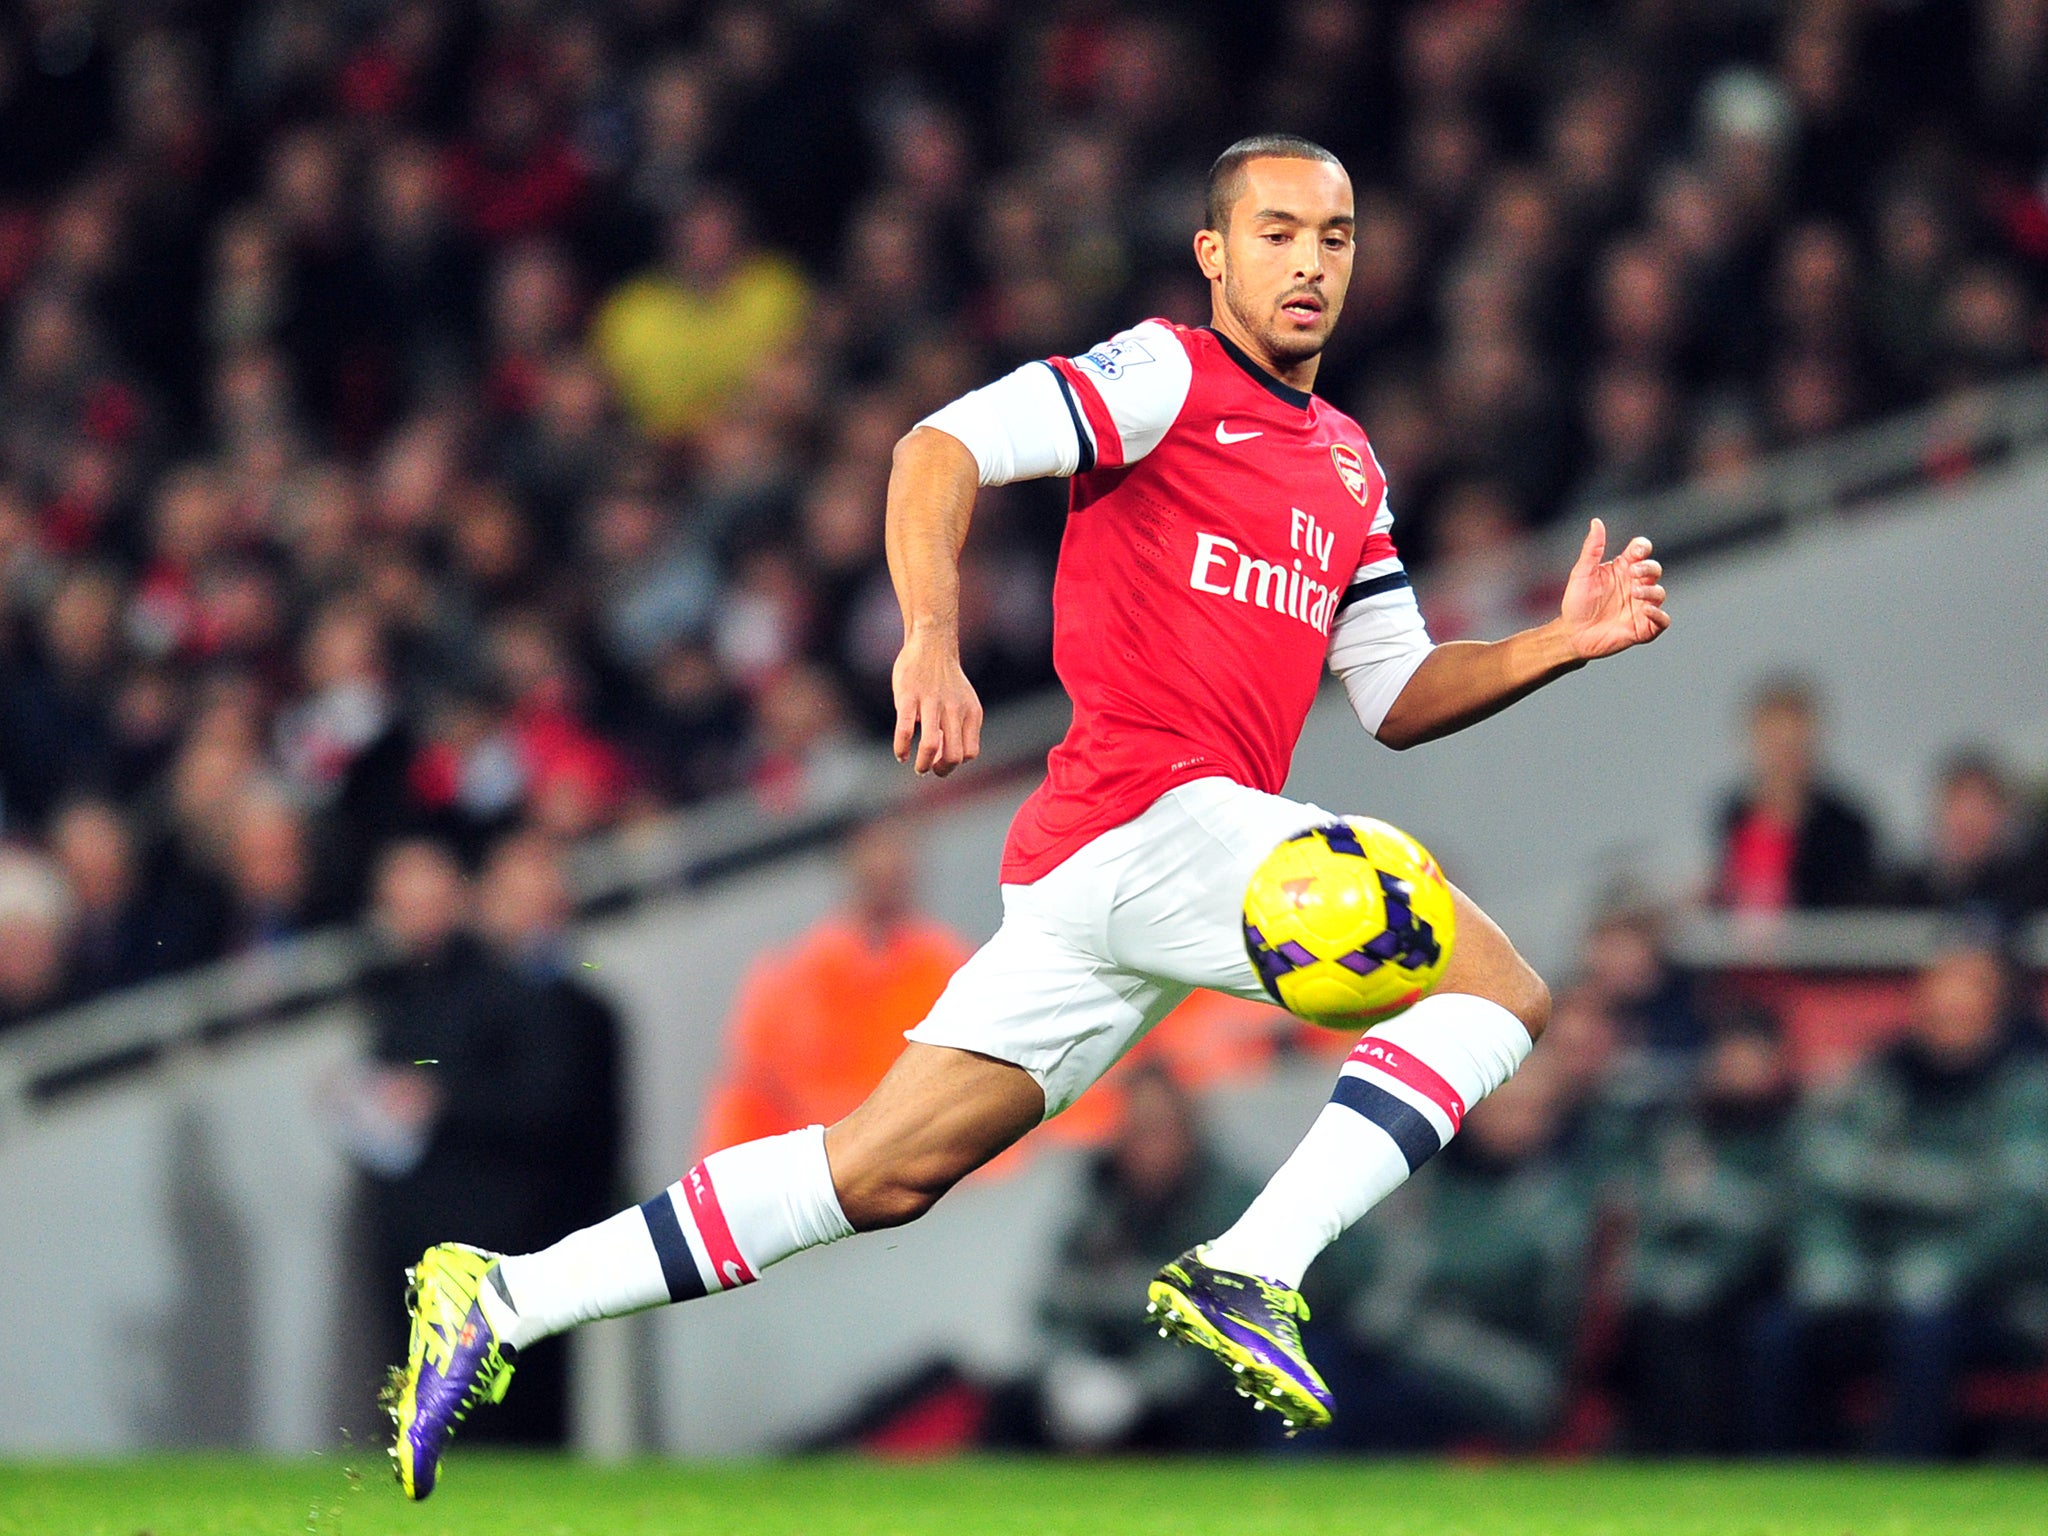 Arsenal winger Theo Walcott has set about returning to his good form shown last season